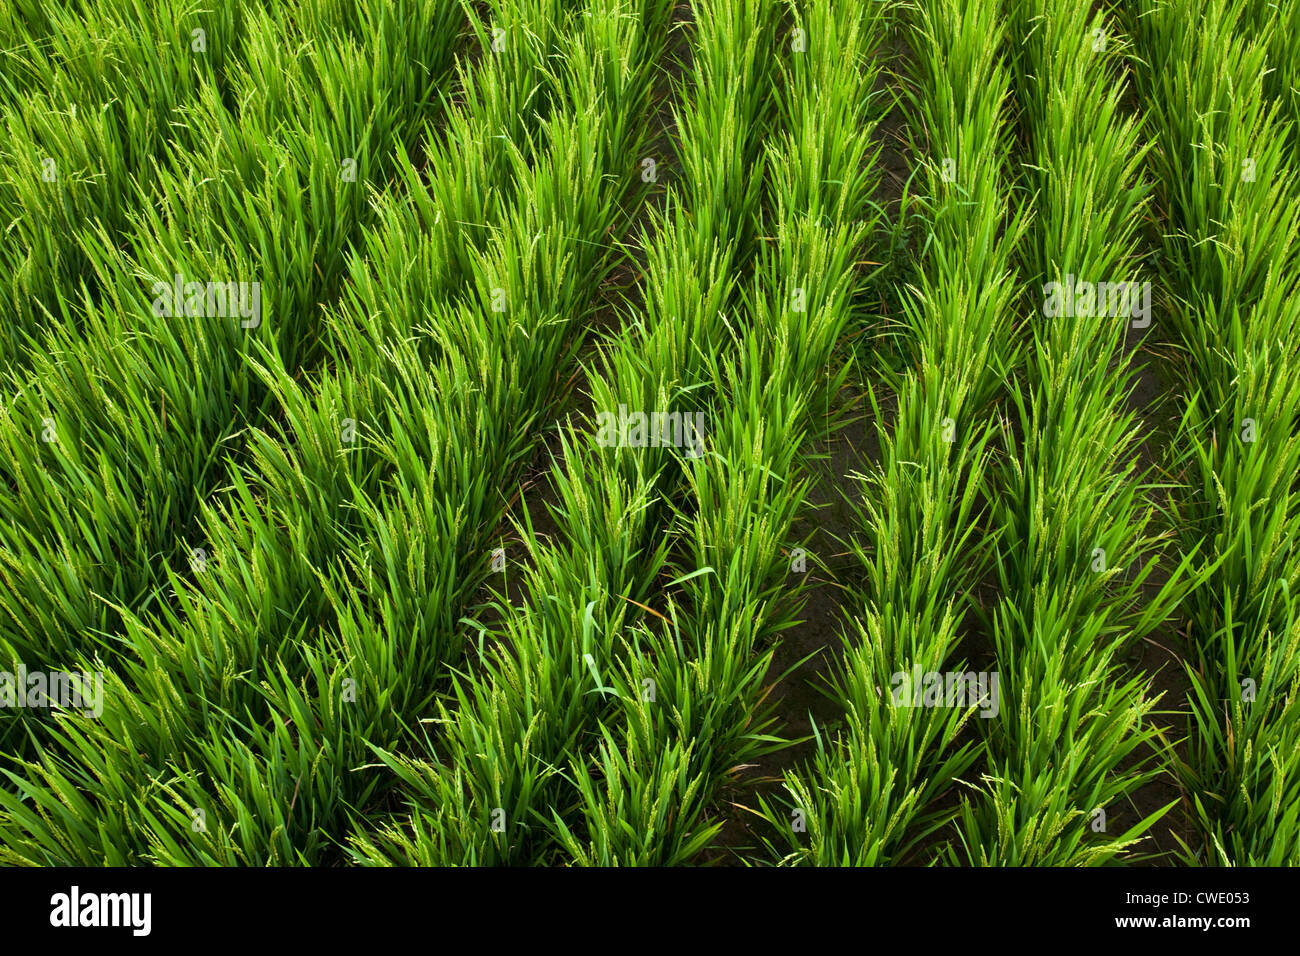 Lush rice growing in a rice field in Bali, Indonesia. Stock Photo